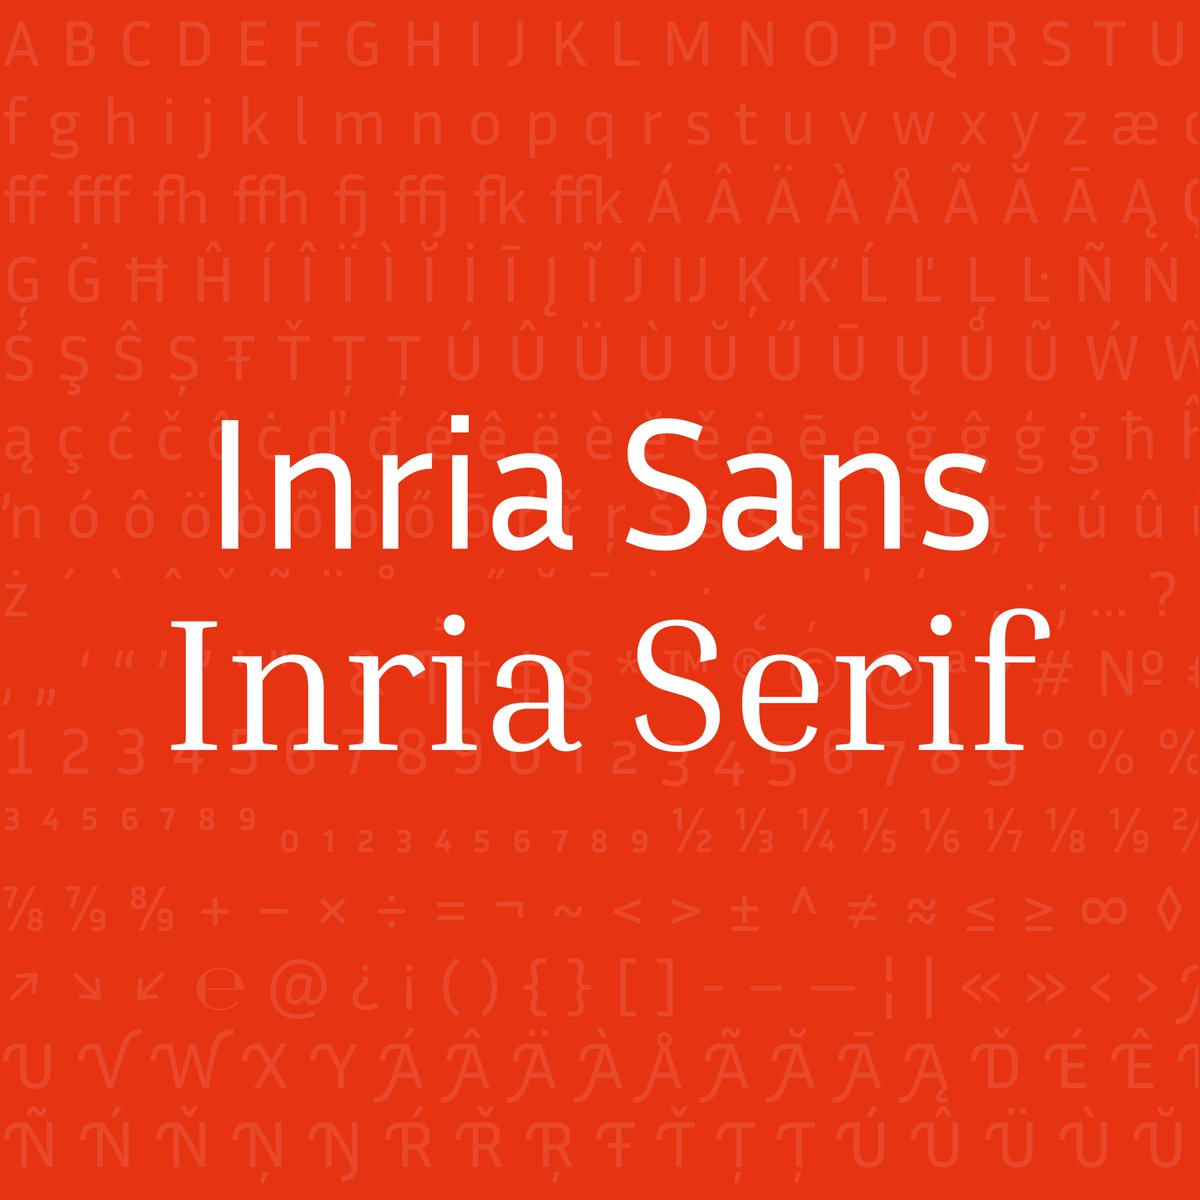 Black Foundry We Have Designed Inria S New Typeface Family Inriasans Inriaserif The Good News We Decided That Given Its Origin It Should Be Used For Free T Co 0htqred64k T Co S0o5y5vcq8